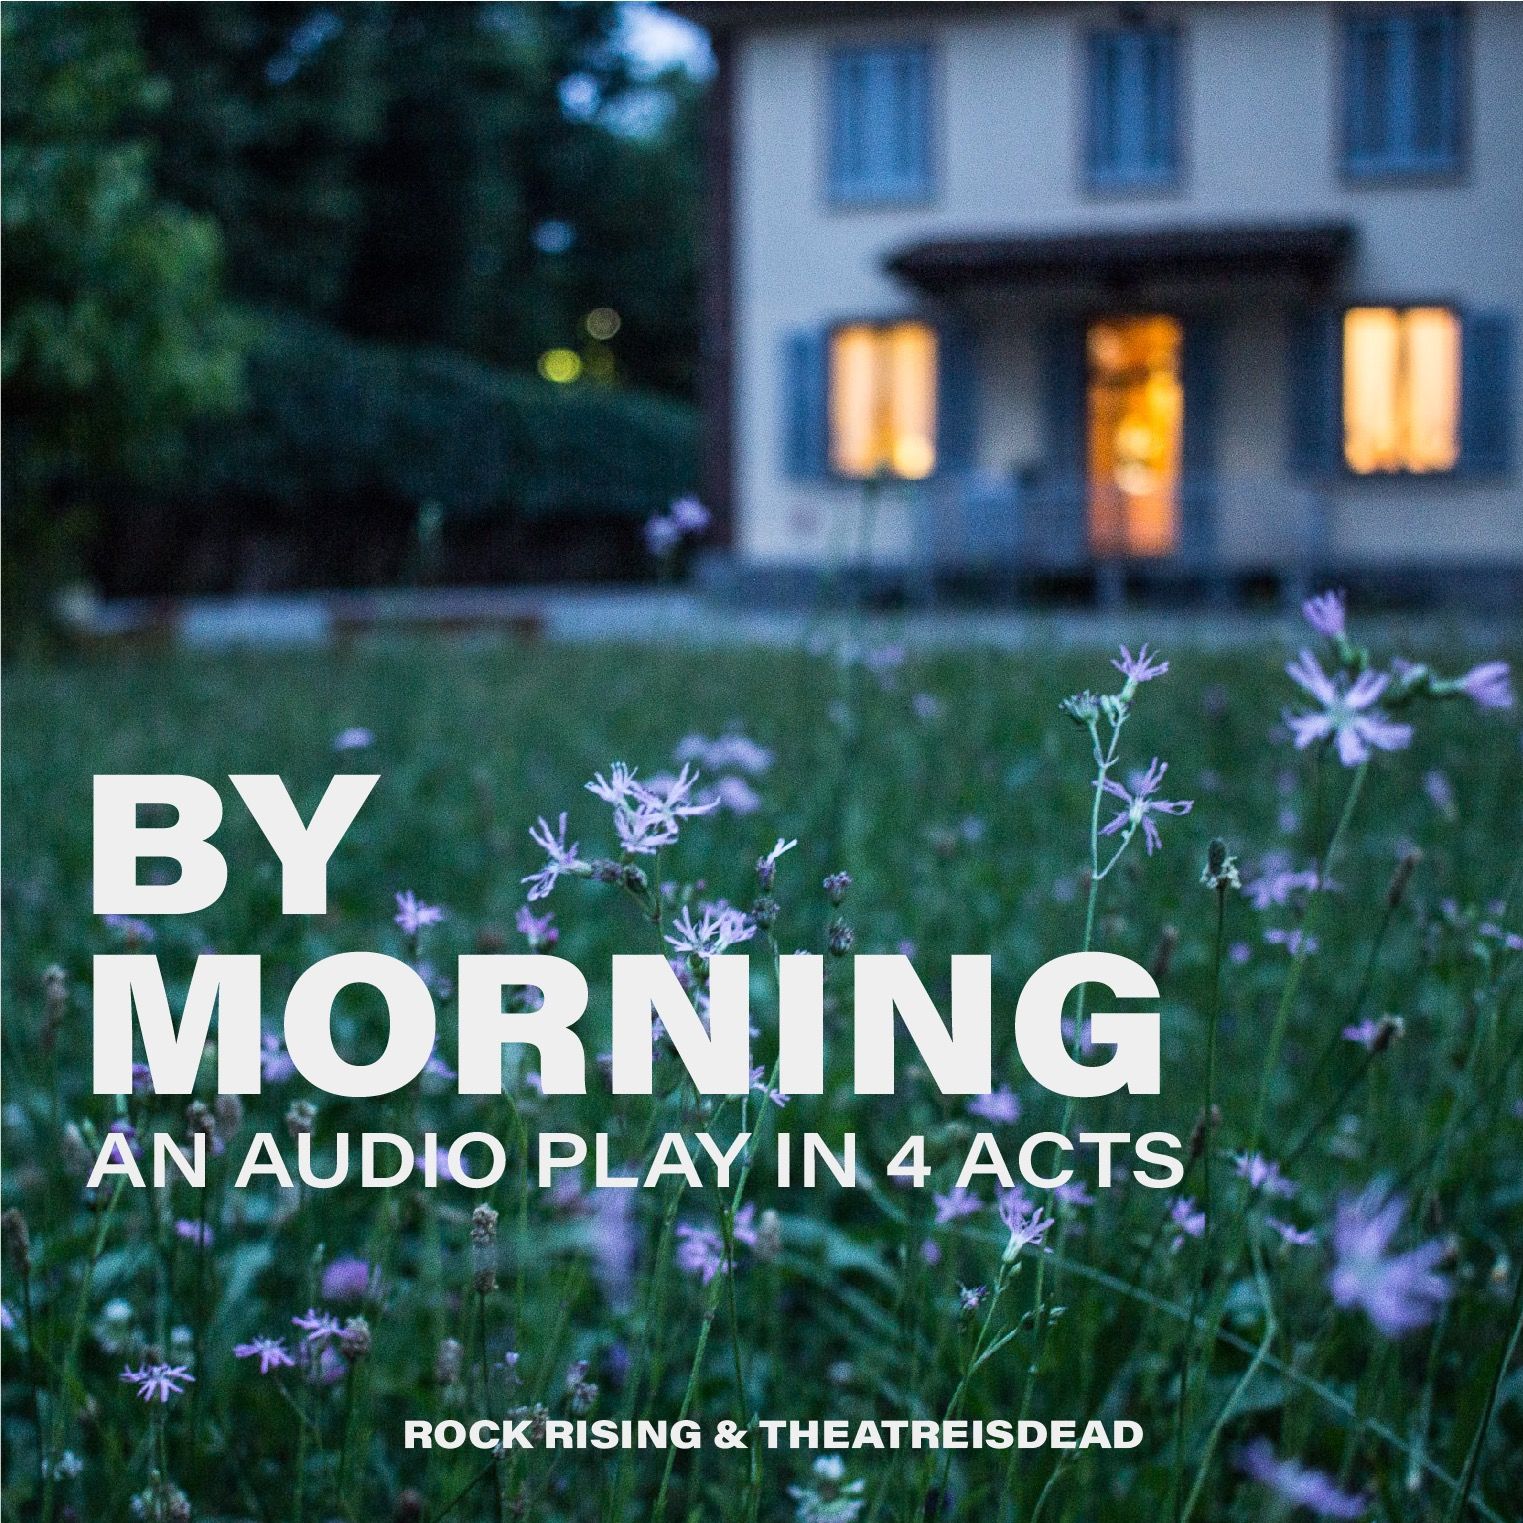 By Morning An Audio Play